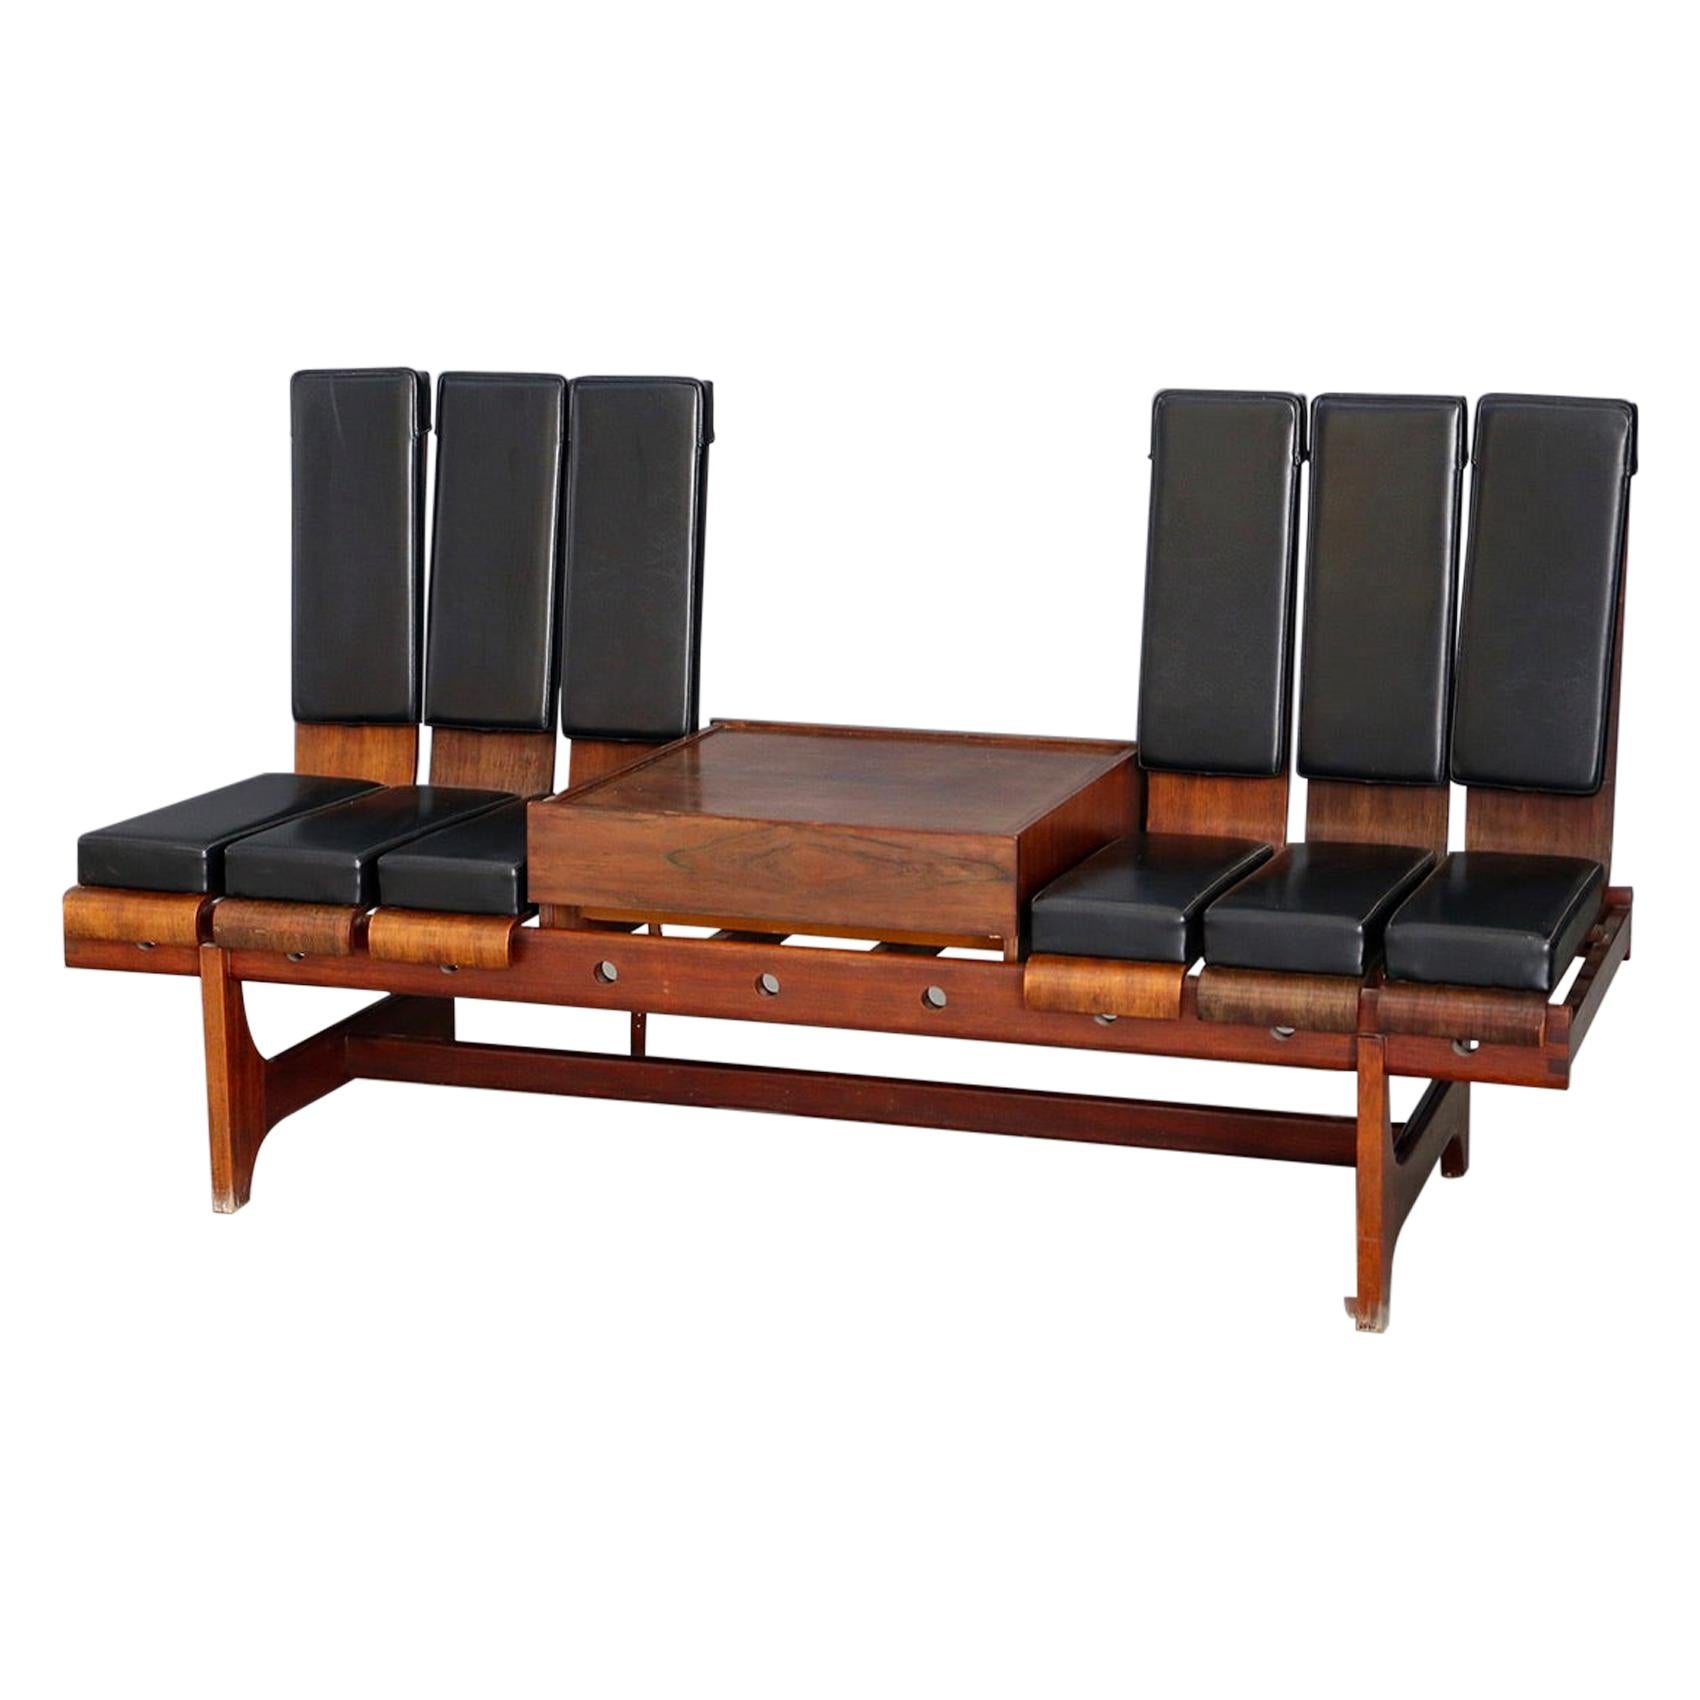 Modular Bench by Barovero Torino in Rosewood and Black Leather, Label 1955